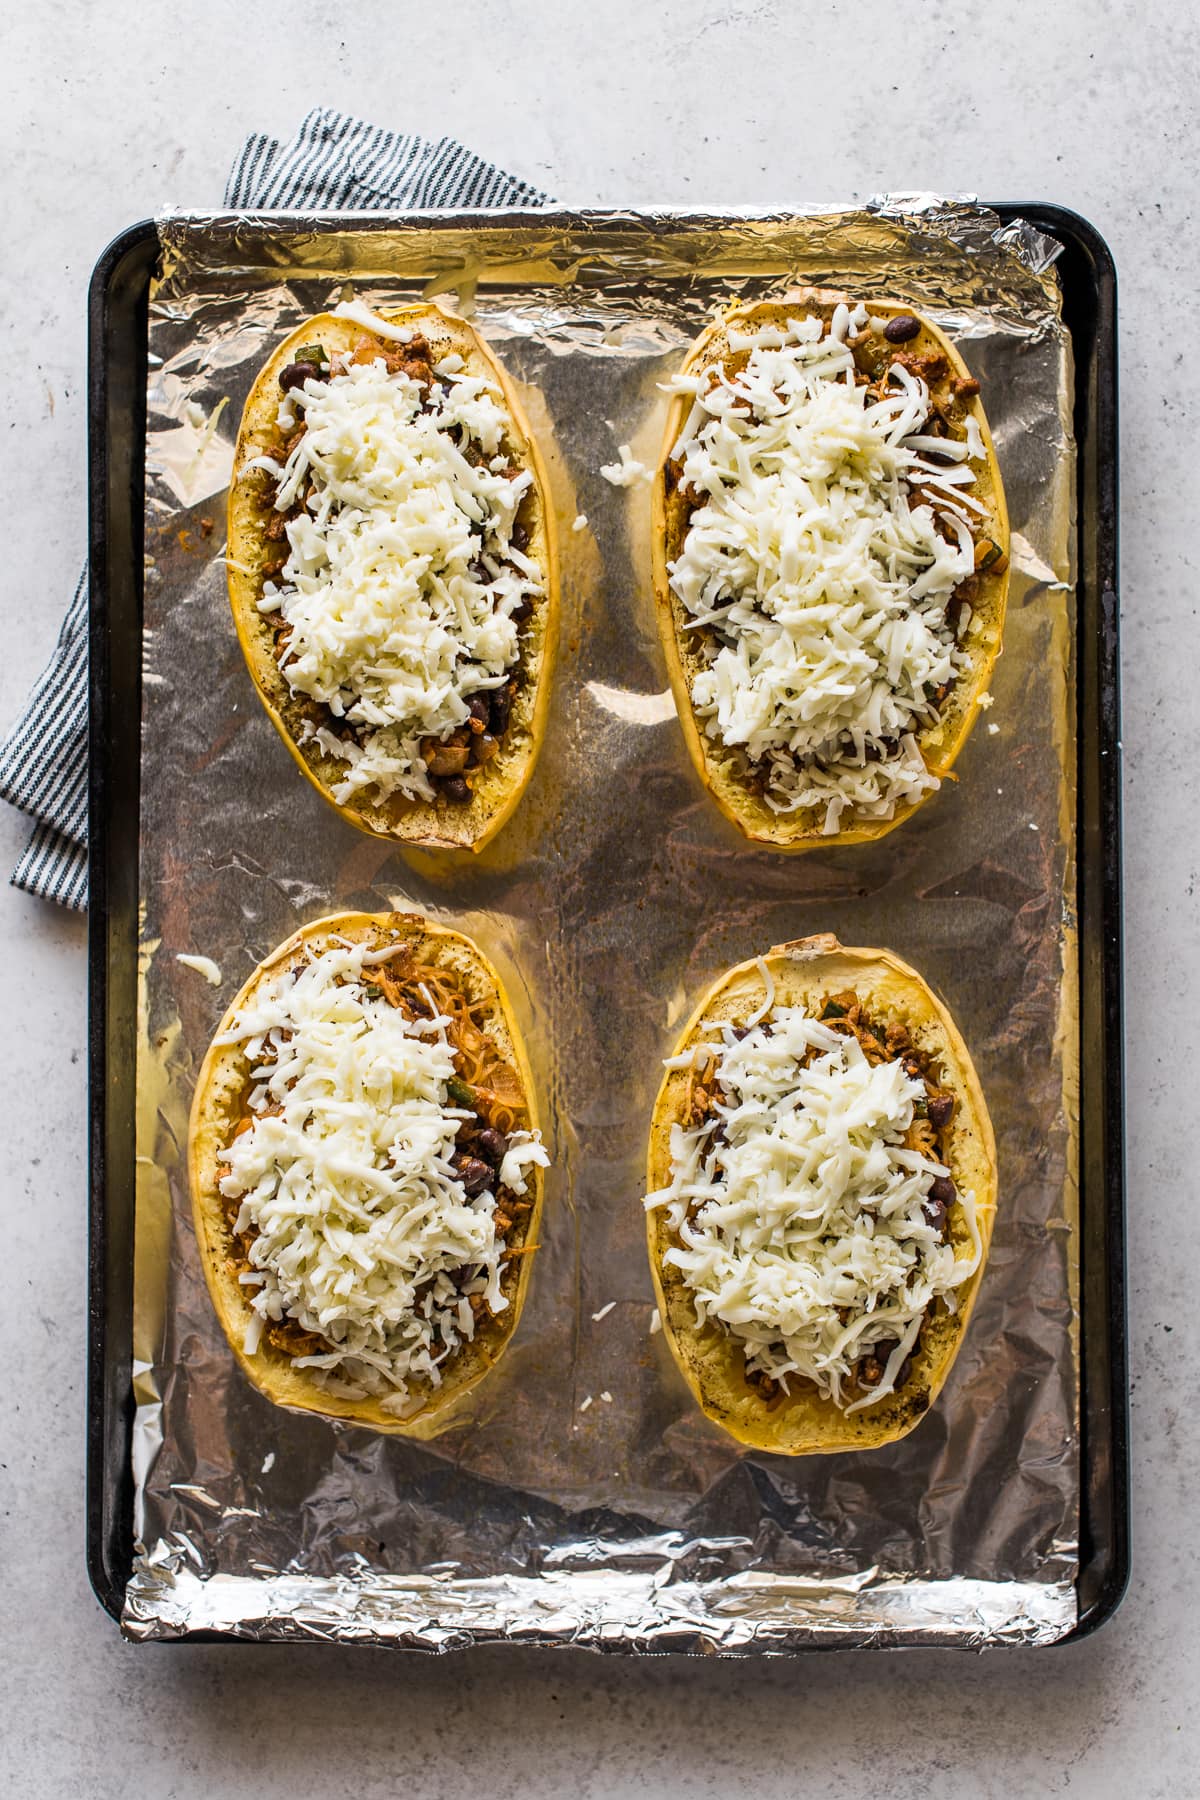 Stuffed spaghetti squash topped with shredded cheese on a baking sheet.